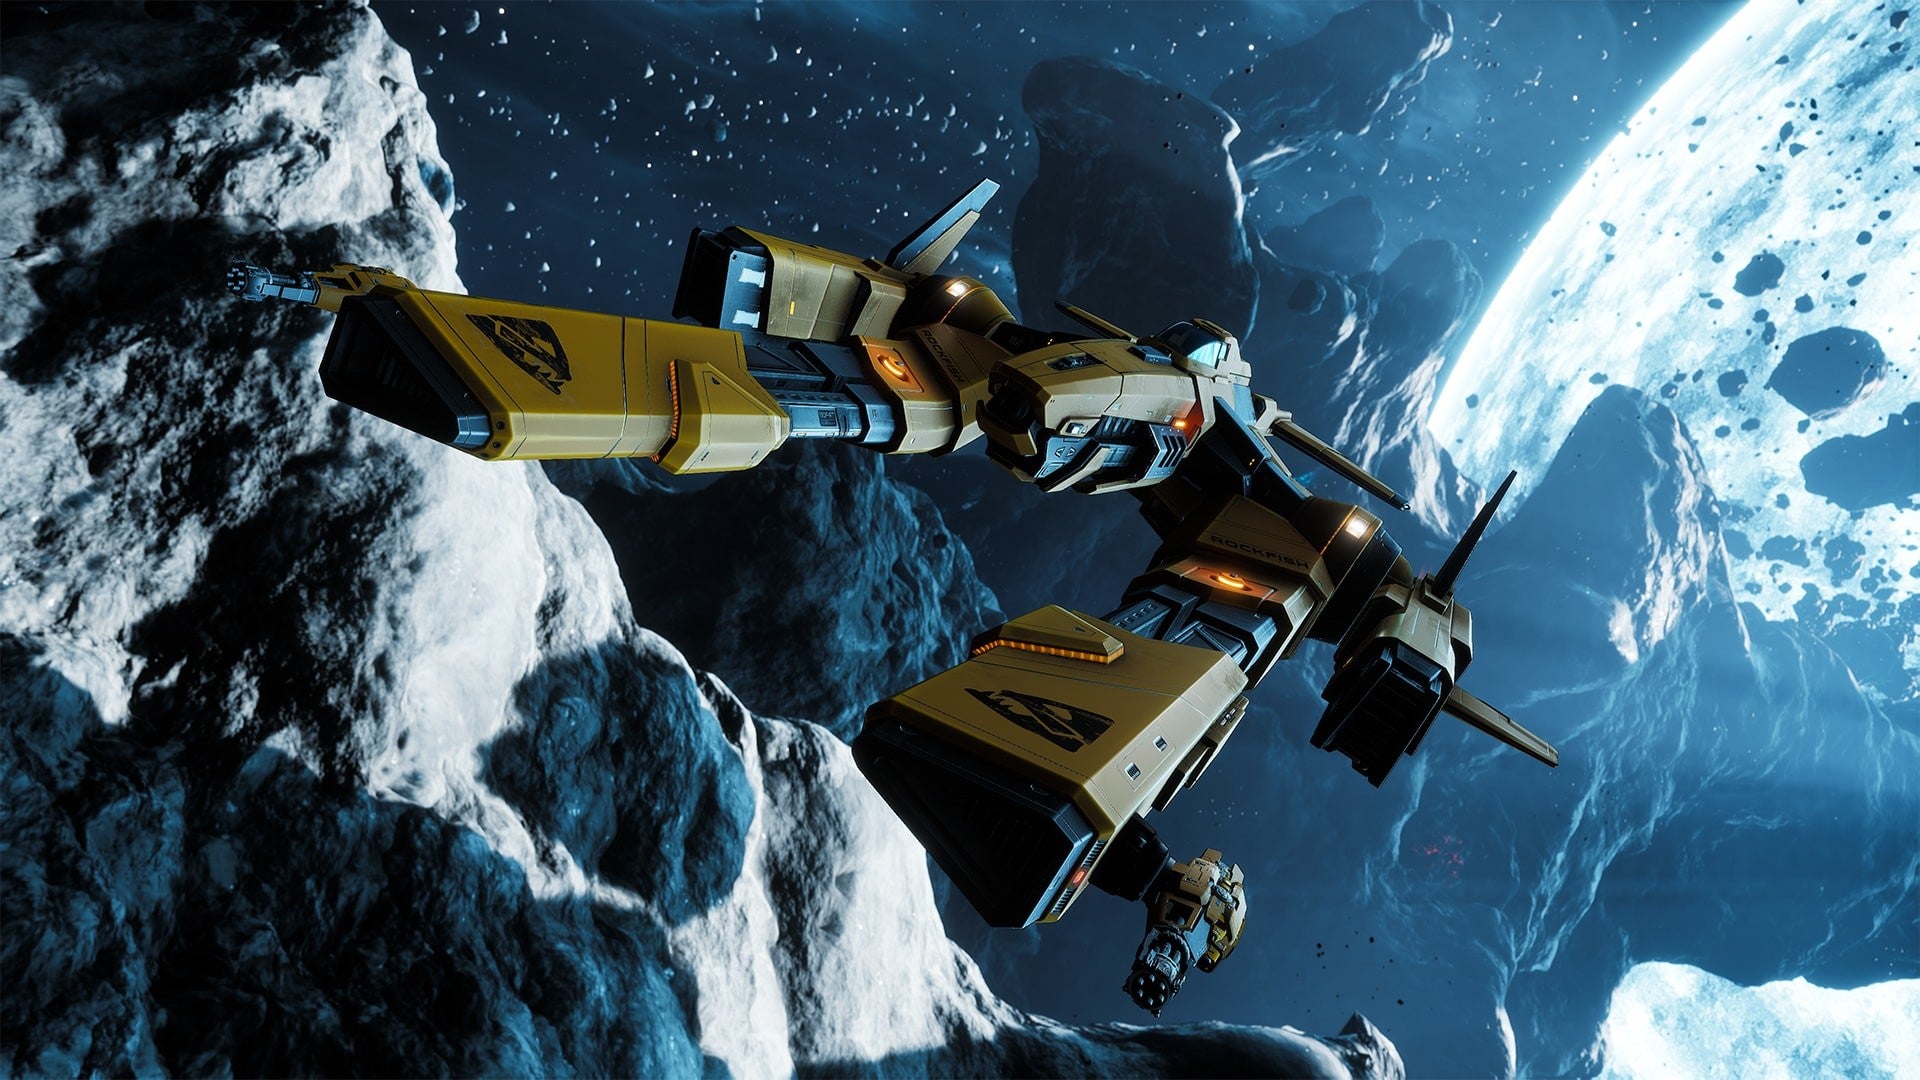 Image for Everspace 2 is not an Epic Store exclusive because of Steam's community and platform tools, says dev